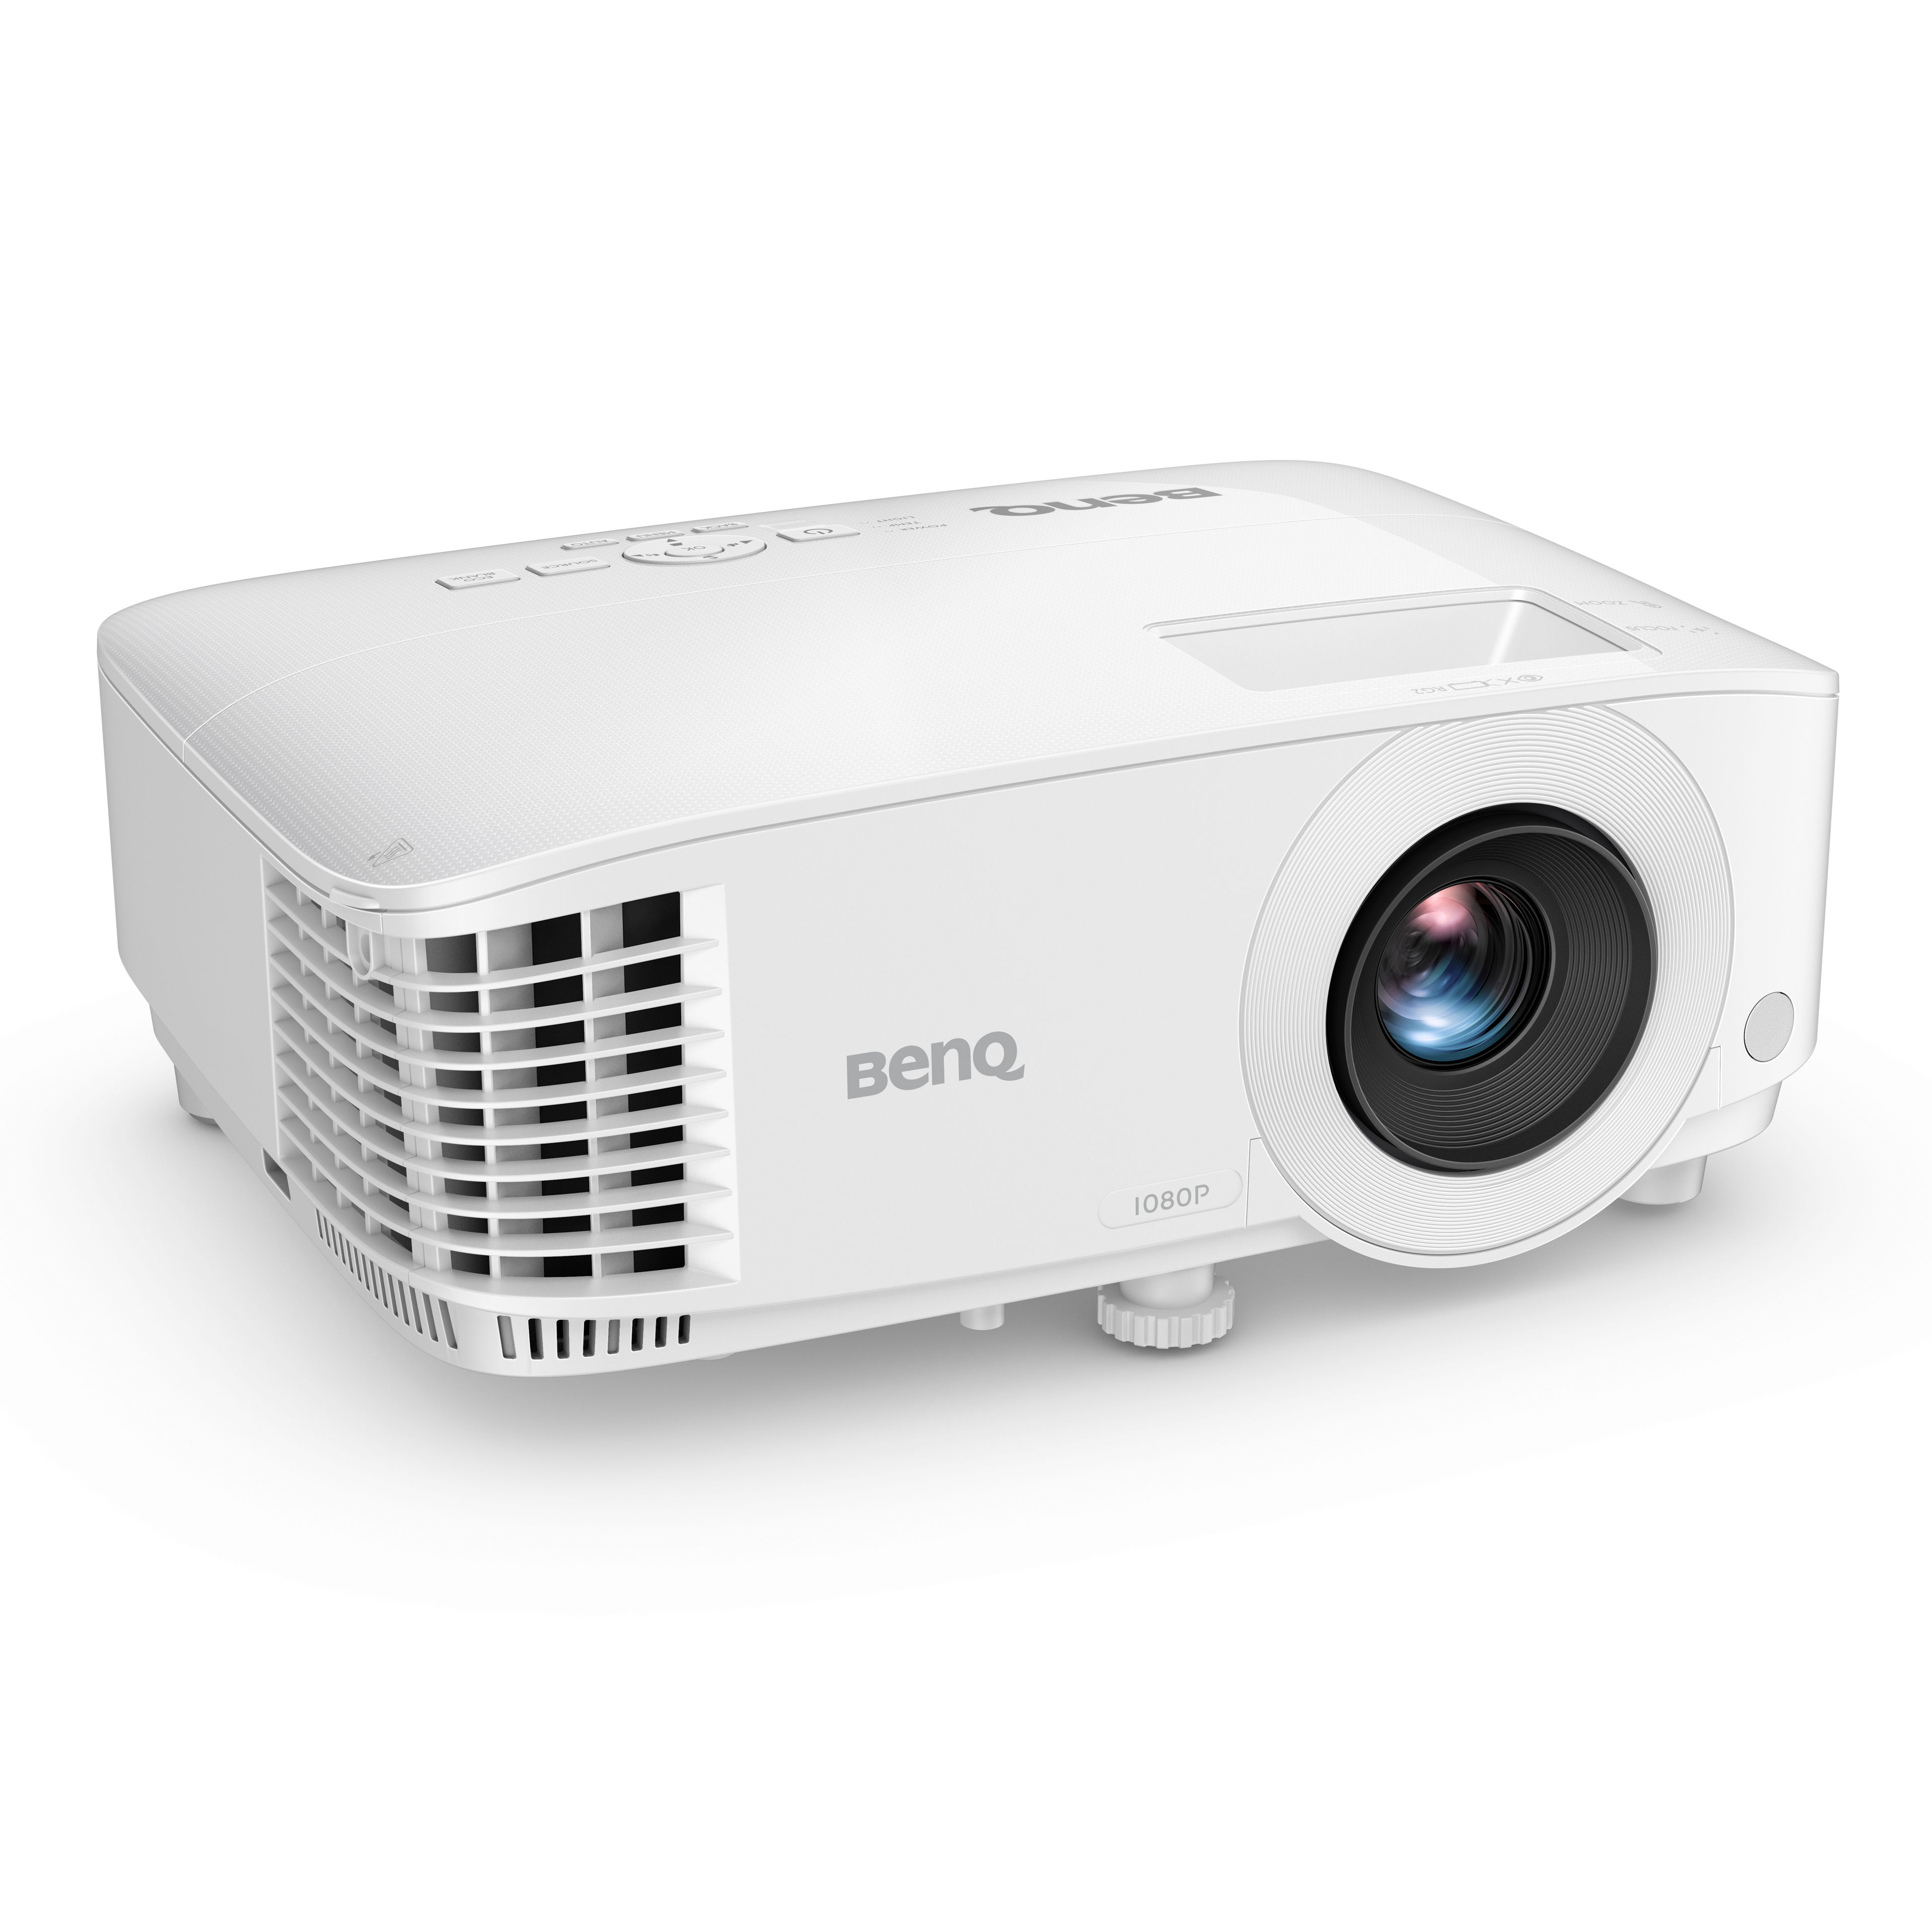 Forbigående Mutton smerte TH575 | 1080p 3800lm Home Theater Projector | BenQ US